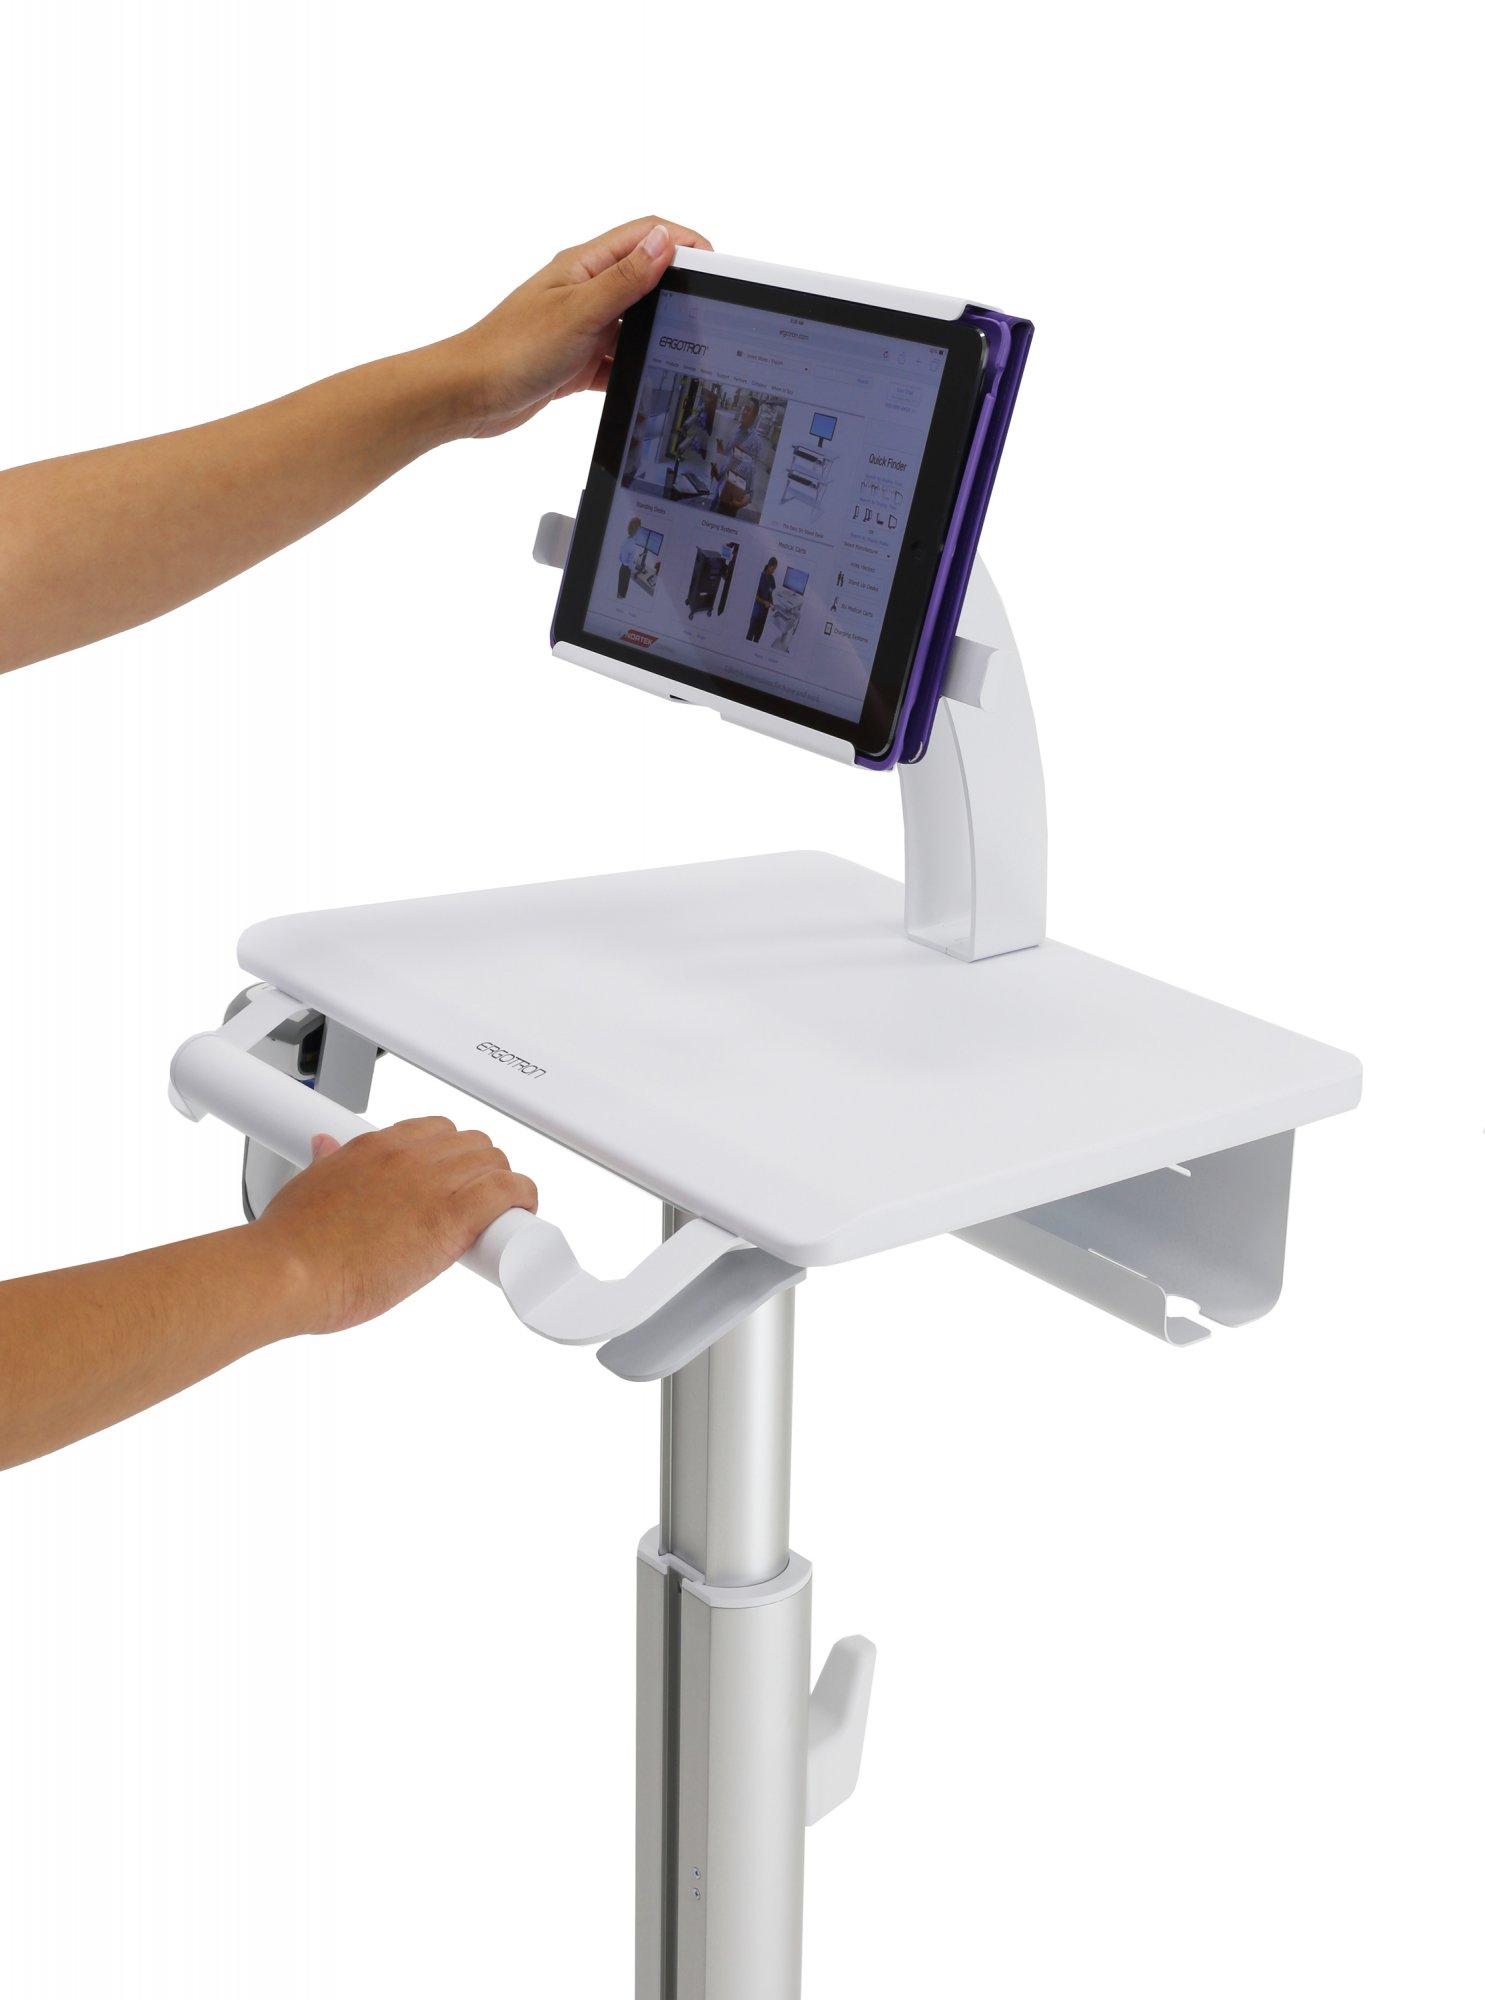 Ergotron SV10-1400-0 StyleView Tablet Cart, SV10, non-powered